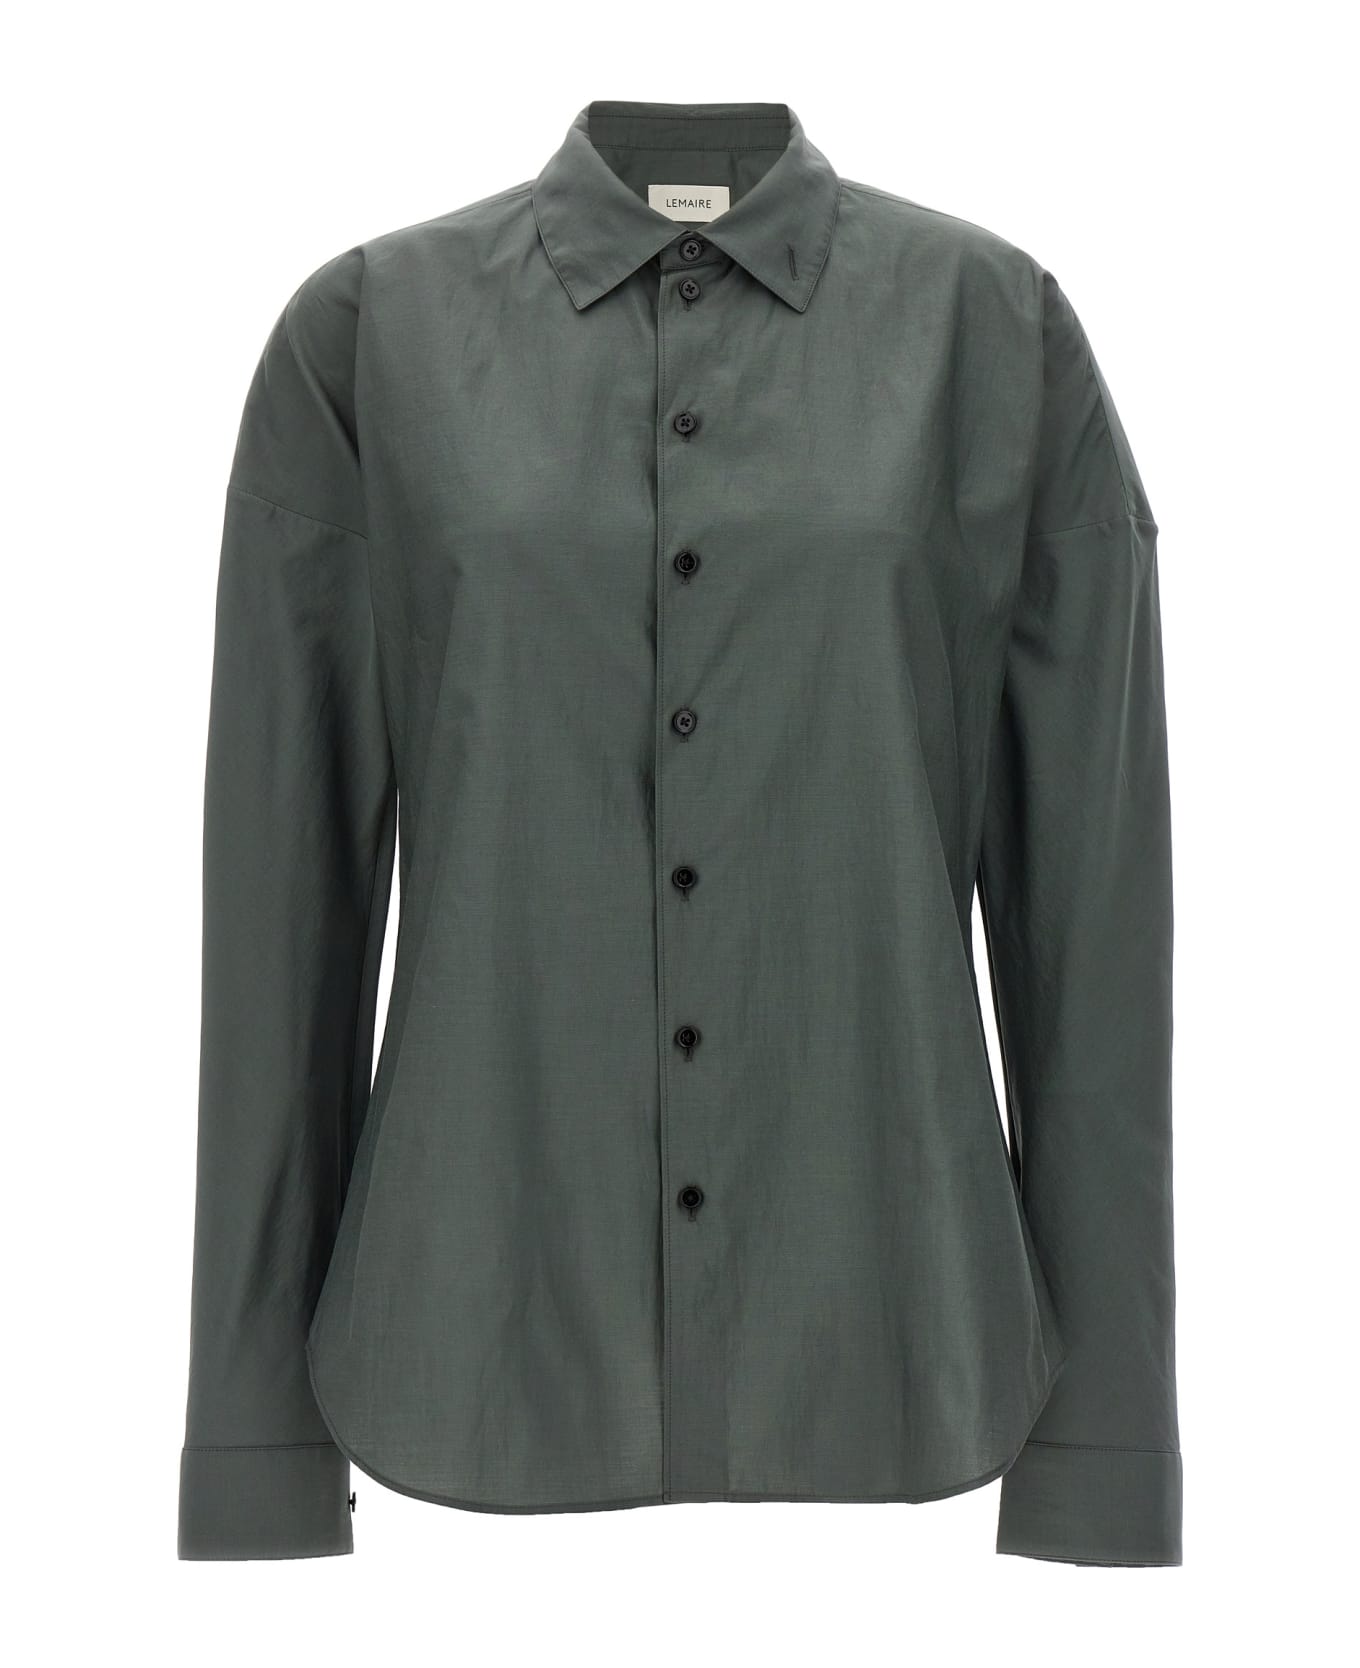 Lemaire 'fitted Band Collar' Shirt - Gray シャツ